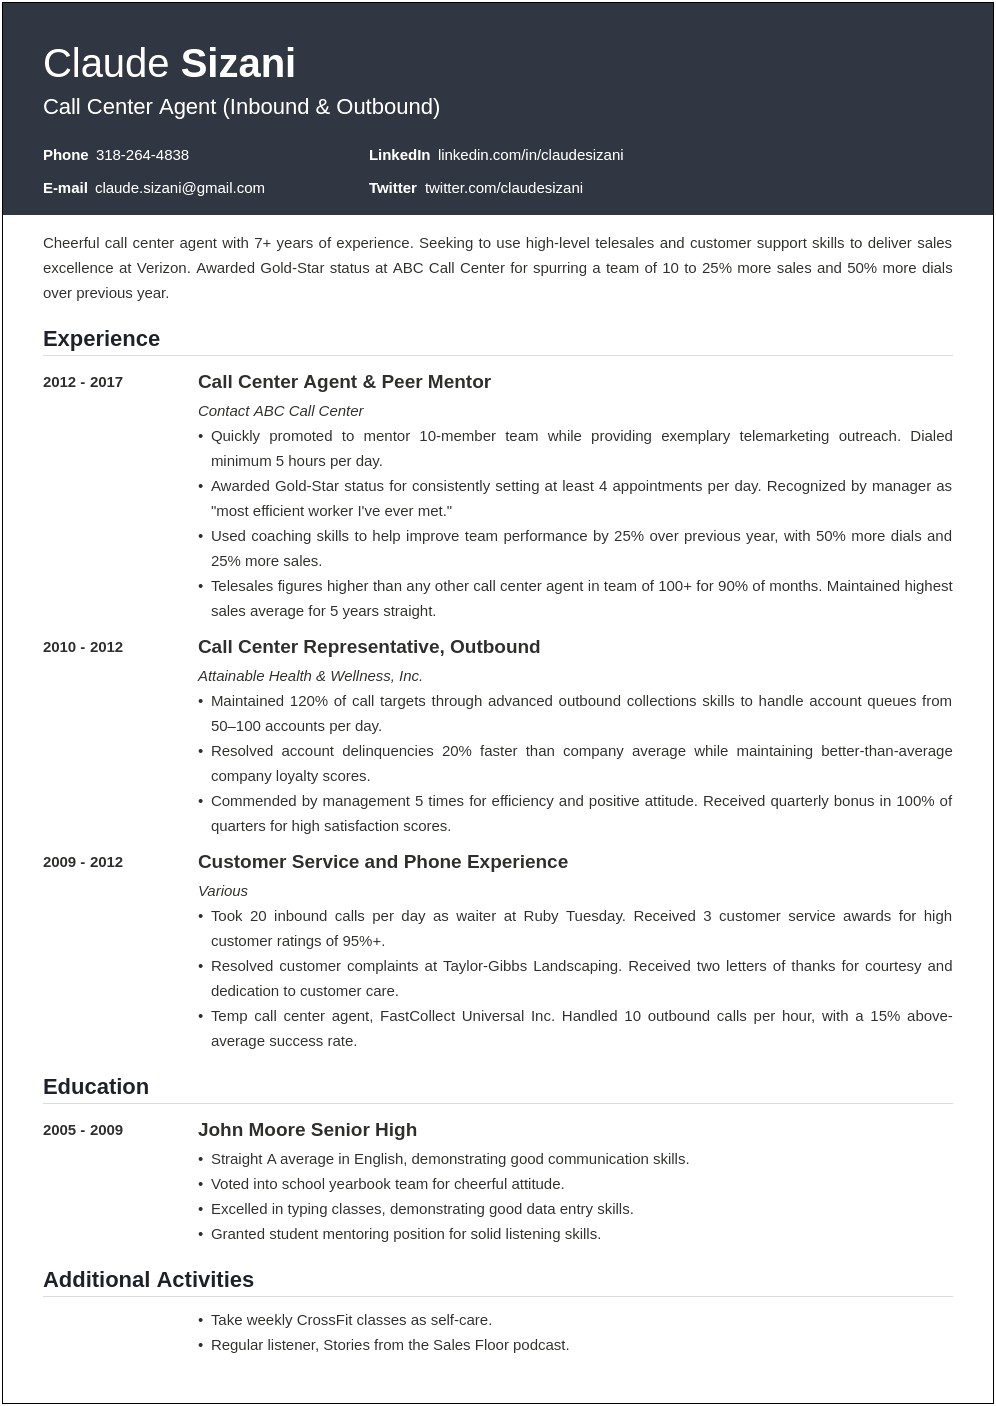 Management Resume Examples 2017 Call Center Management